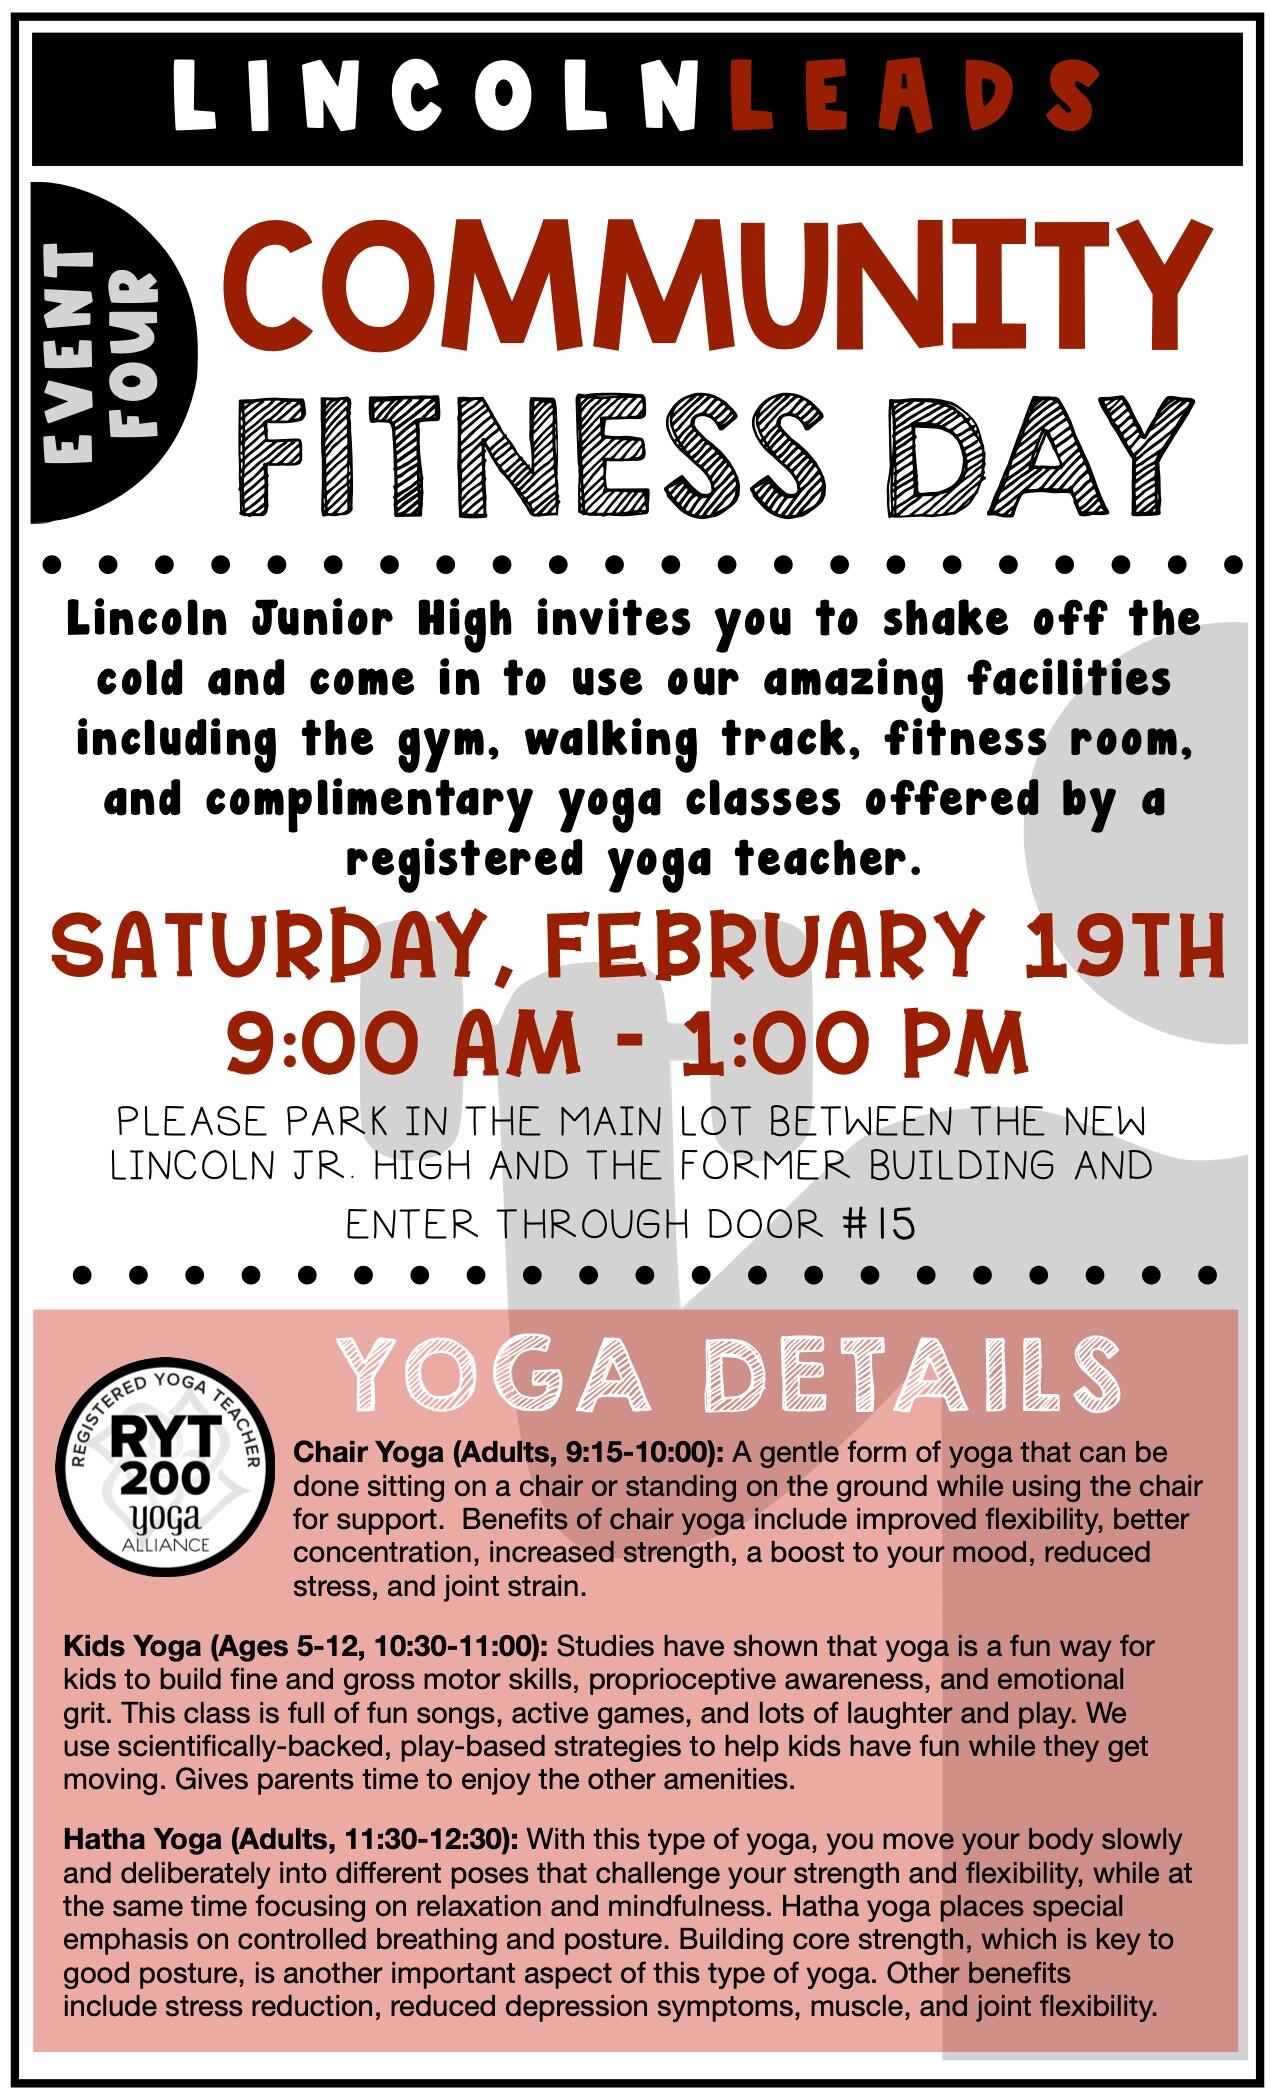 Lincoln Leads Community Fitness Day